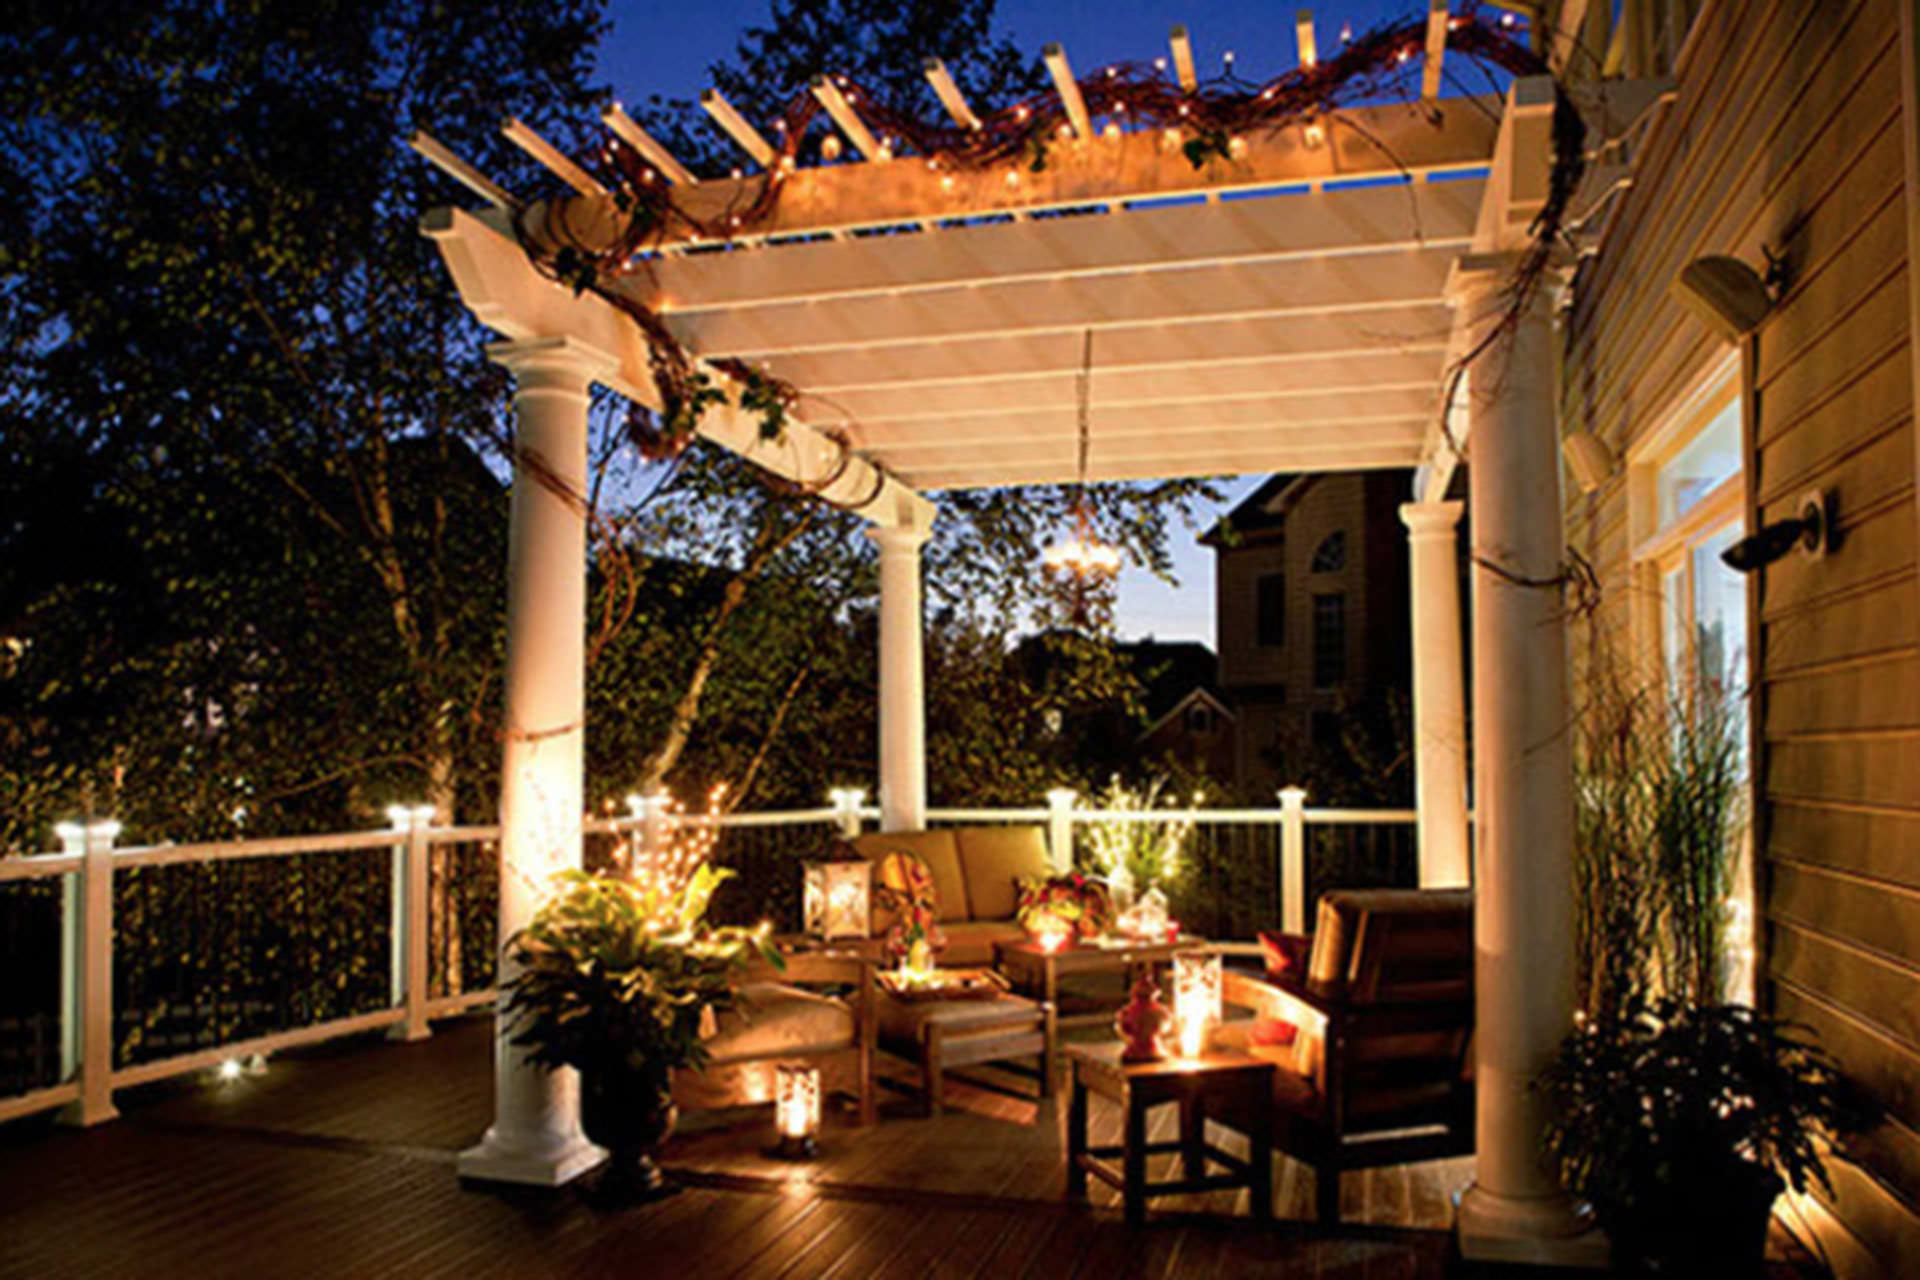 How To Hang Lights On Pergola Five Pergola Lighting Ideas to Illuminate Your Outdoor Space